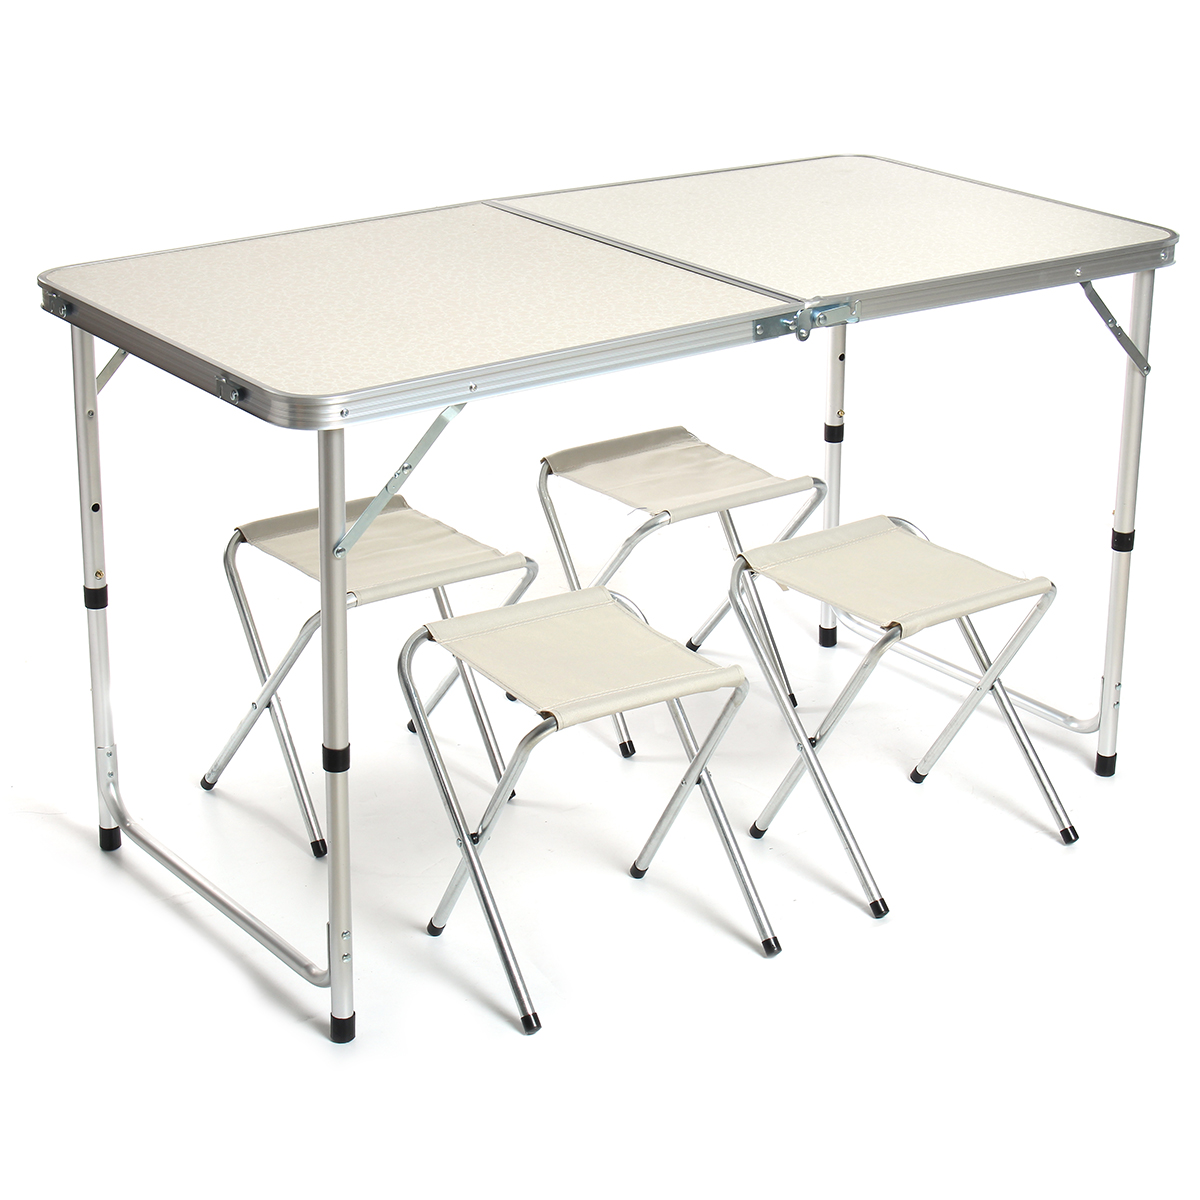 Folding Table 4ft Aluminum Camping Table Chair Set, Portable Picnic Card Table, Three Heights Adjustable Legs-47.24''x23.62'' - image 1 of 10